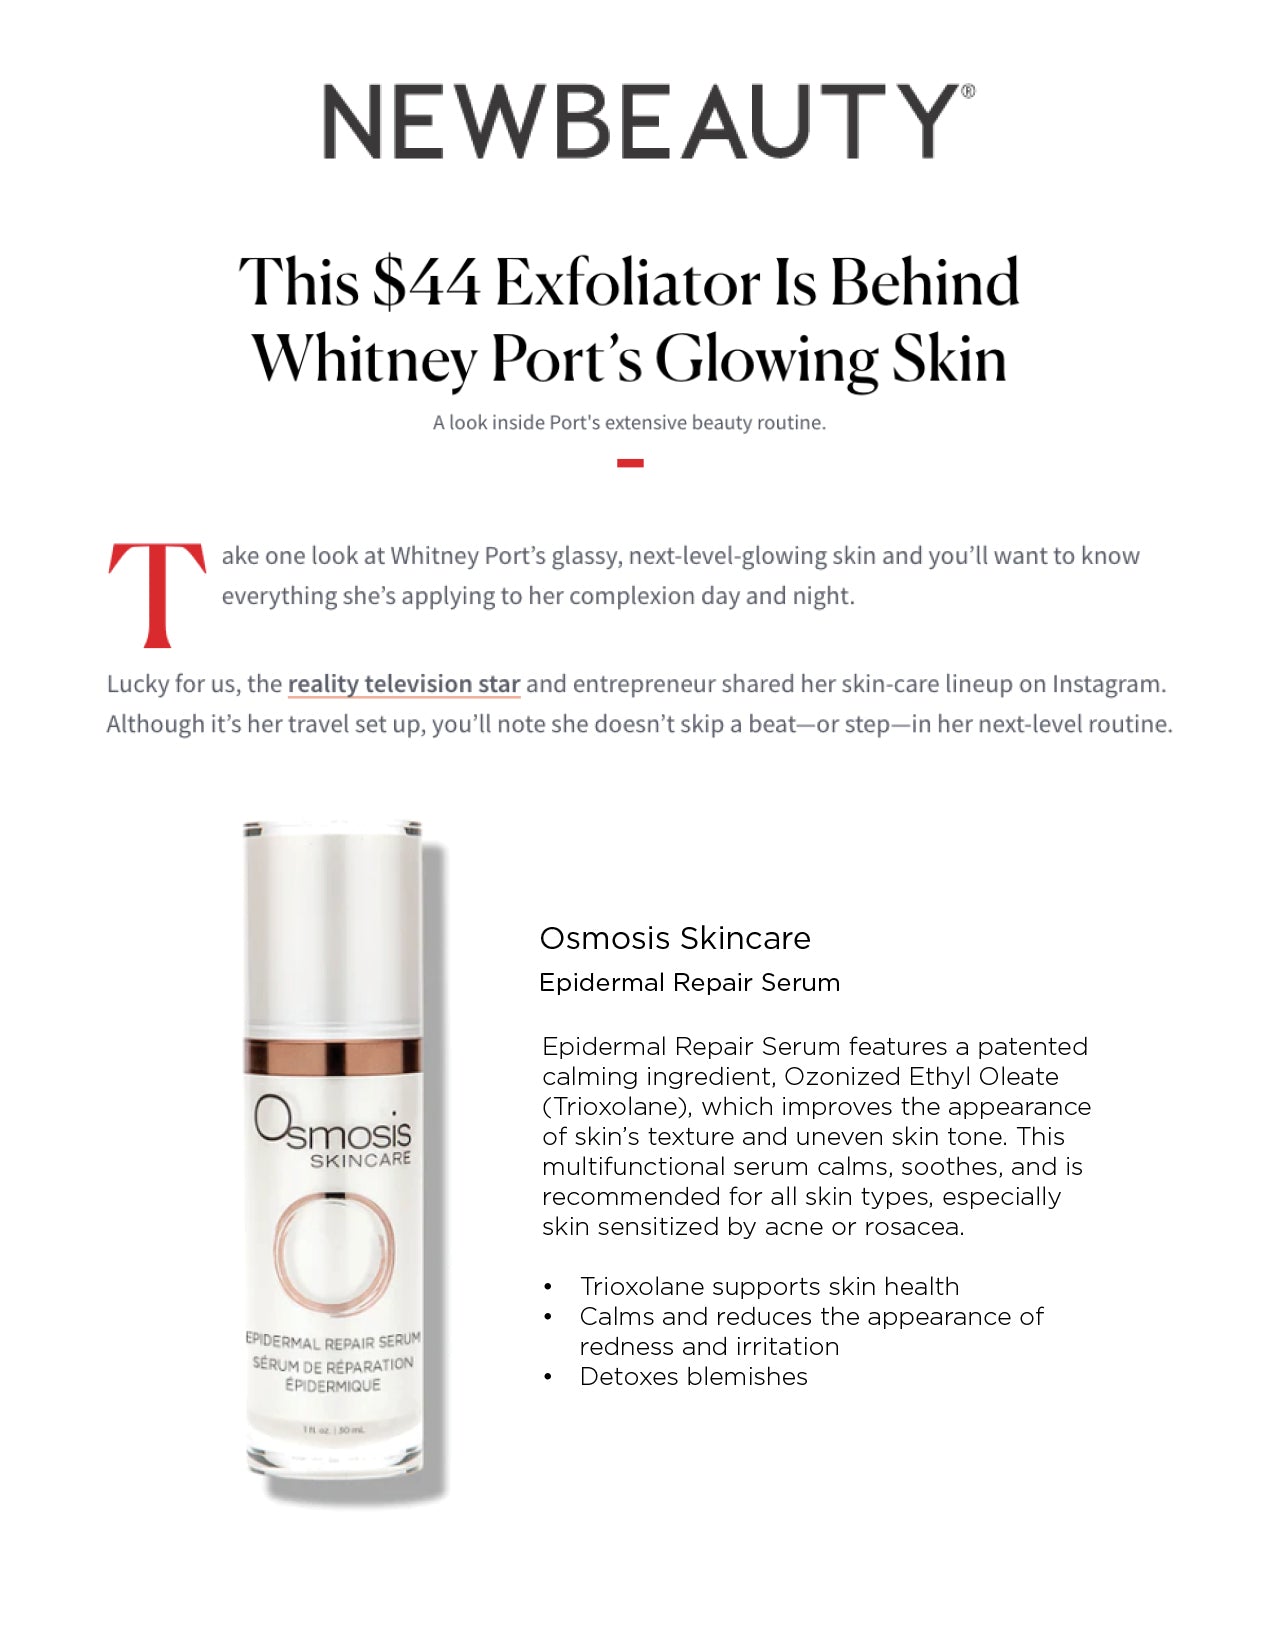 Epidermal Repair Serum  was included in the New Beauty article about Whitney Ports skincare essentials.